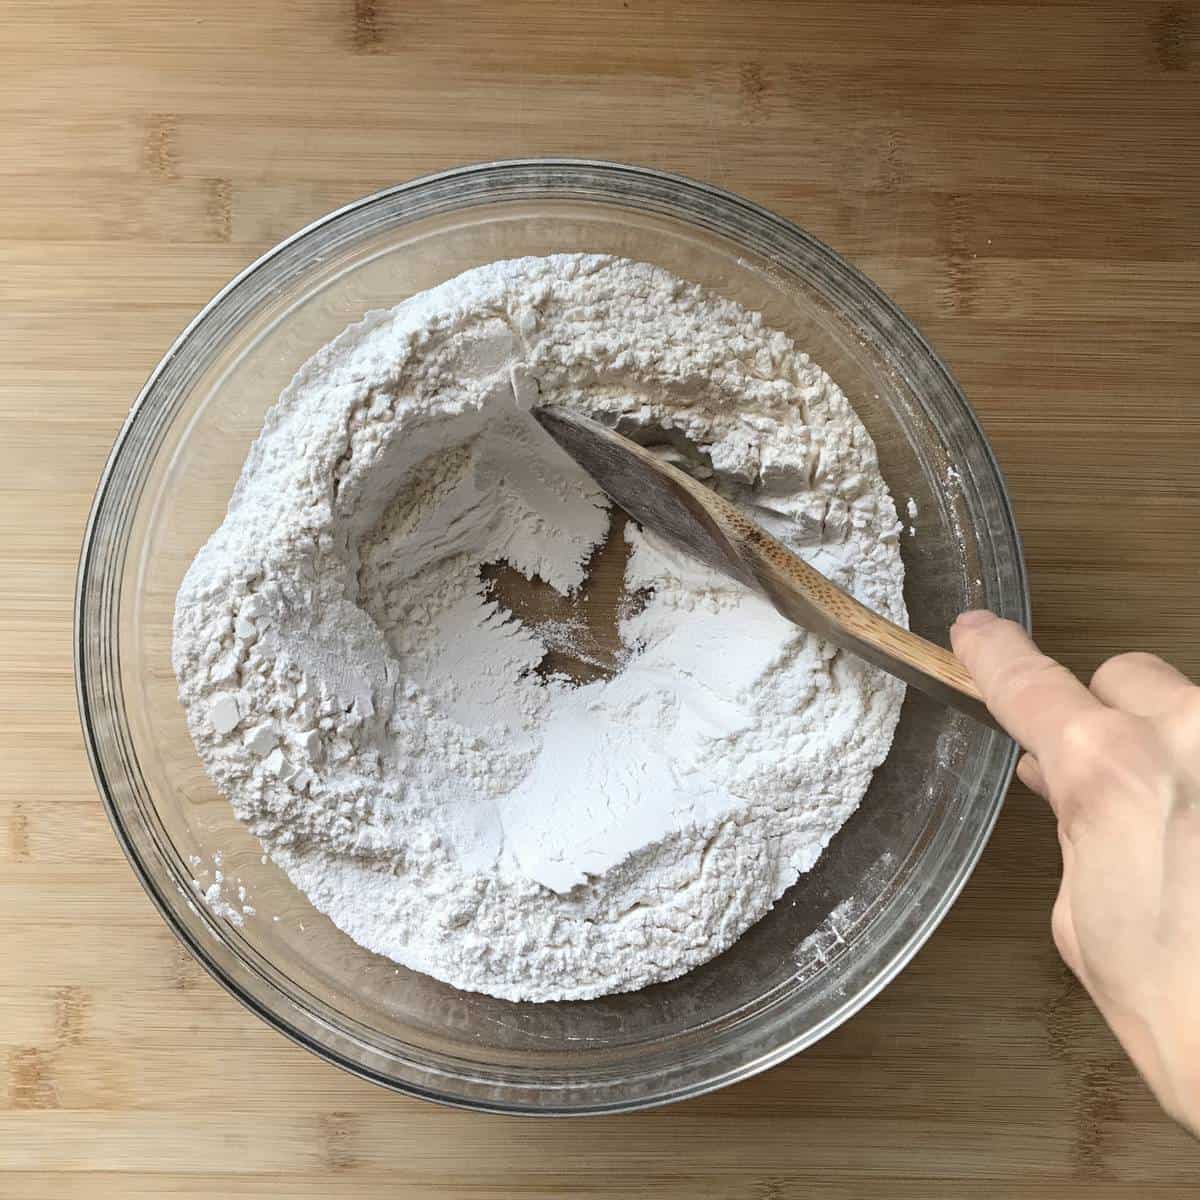 A well is created with flour that has been placed in a bowl.